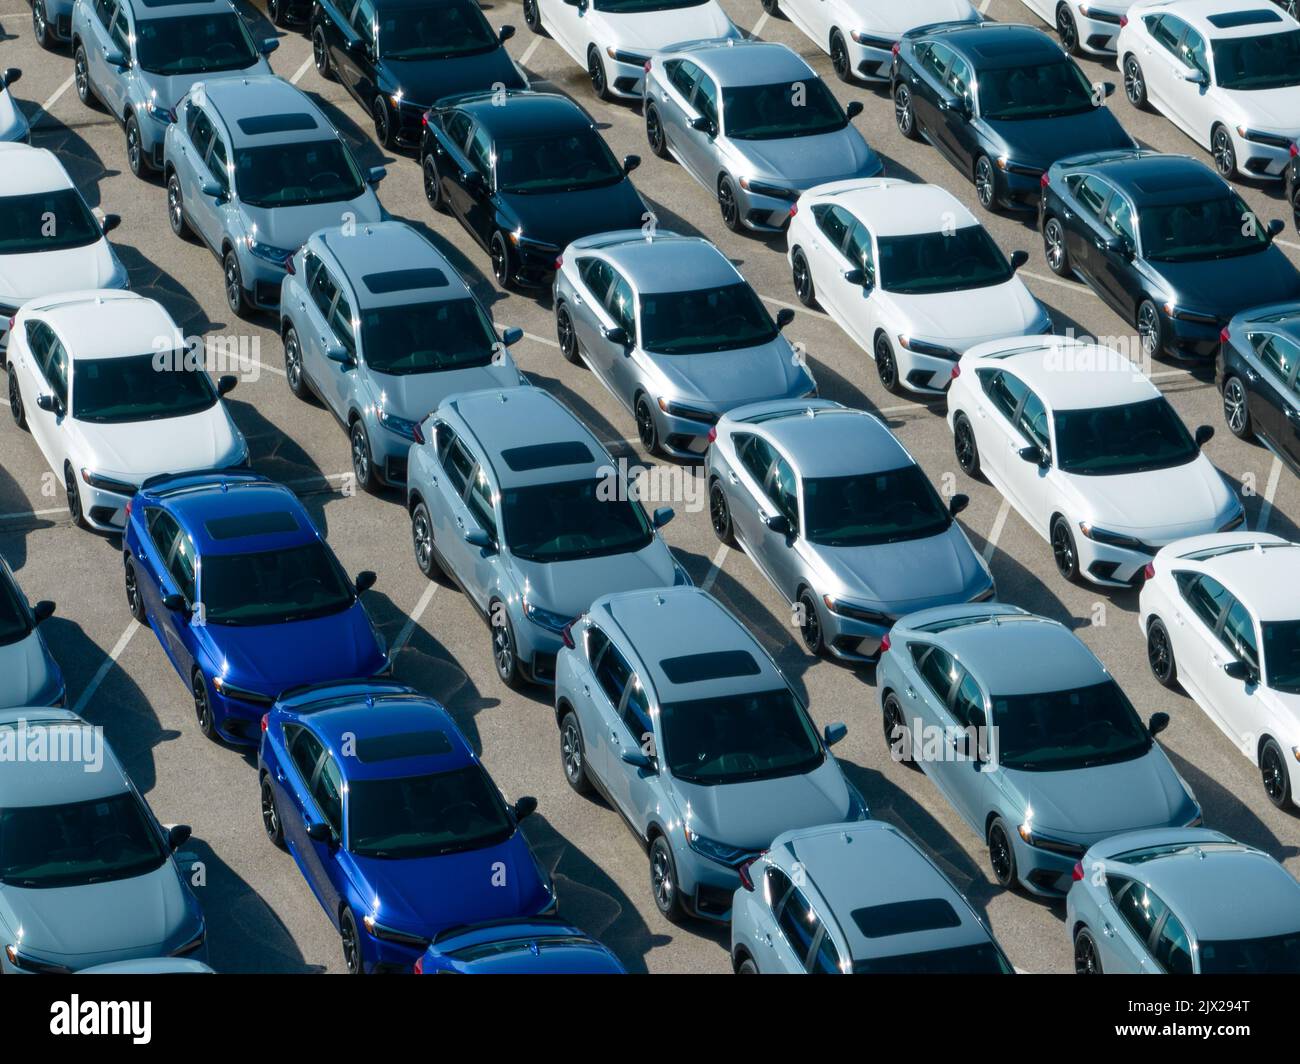 An aerial view above a parking lot at a Honda Motor Company plant. Rows of newly manufactured Honda Civic and CR-V vehicles, seen on a sunny day. Stock Photo